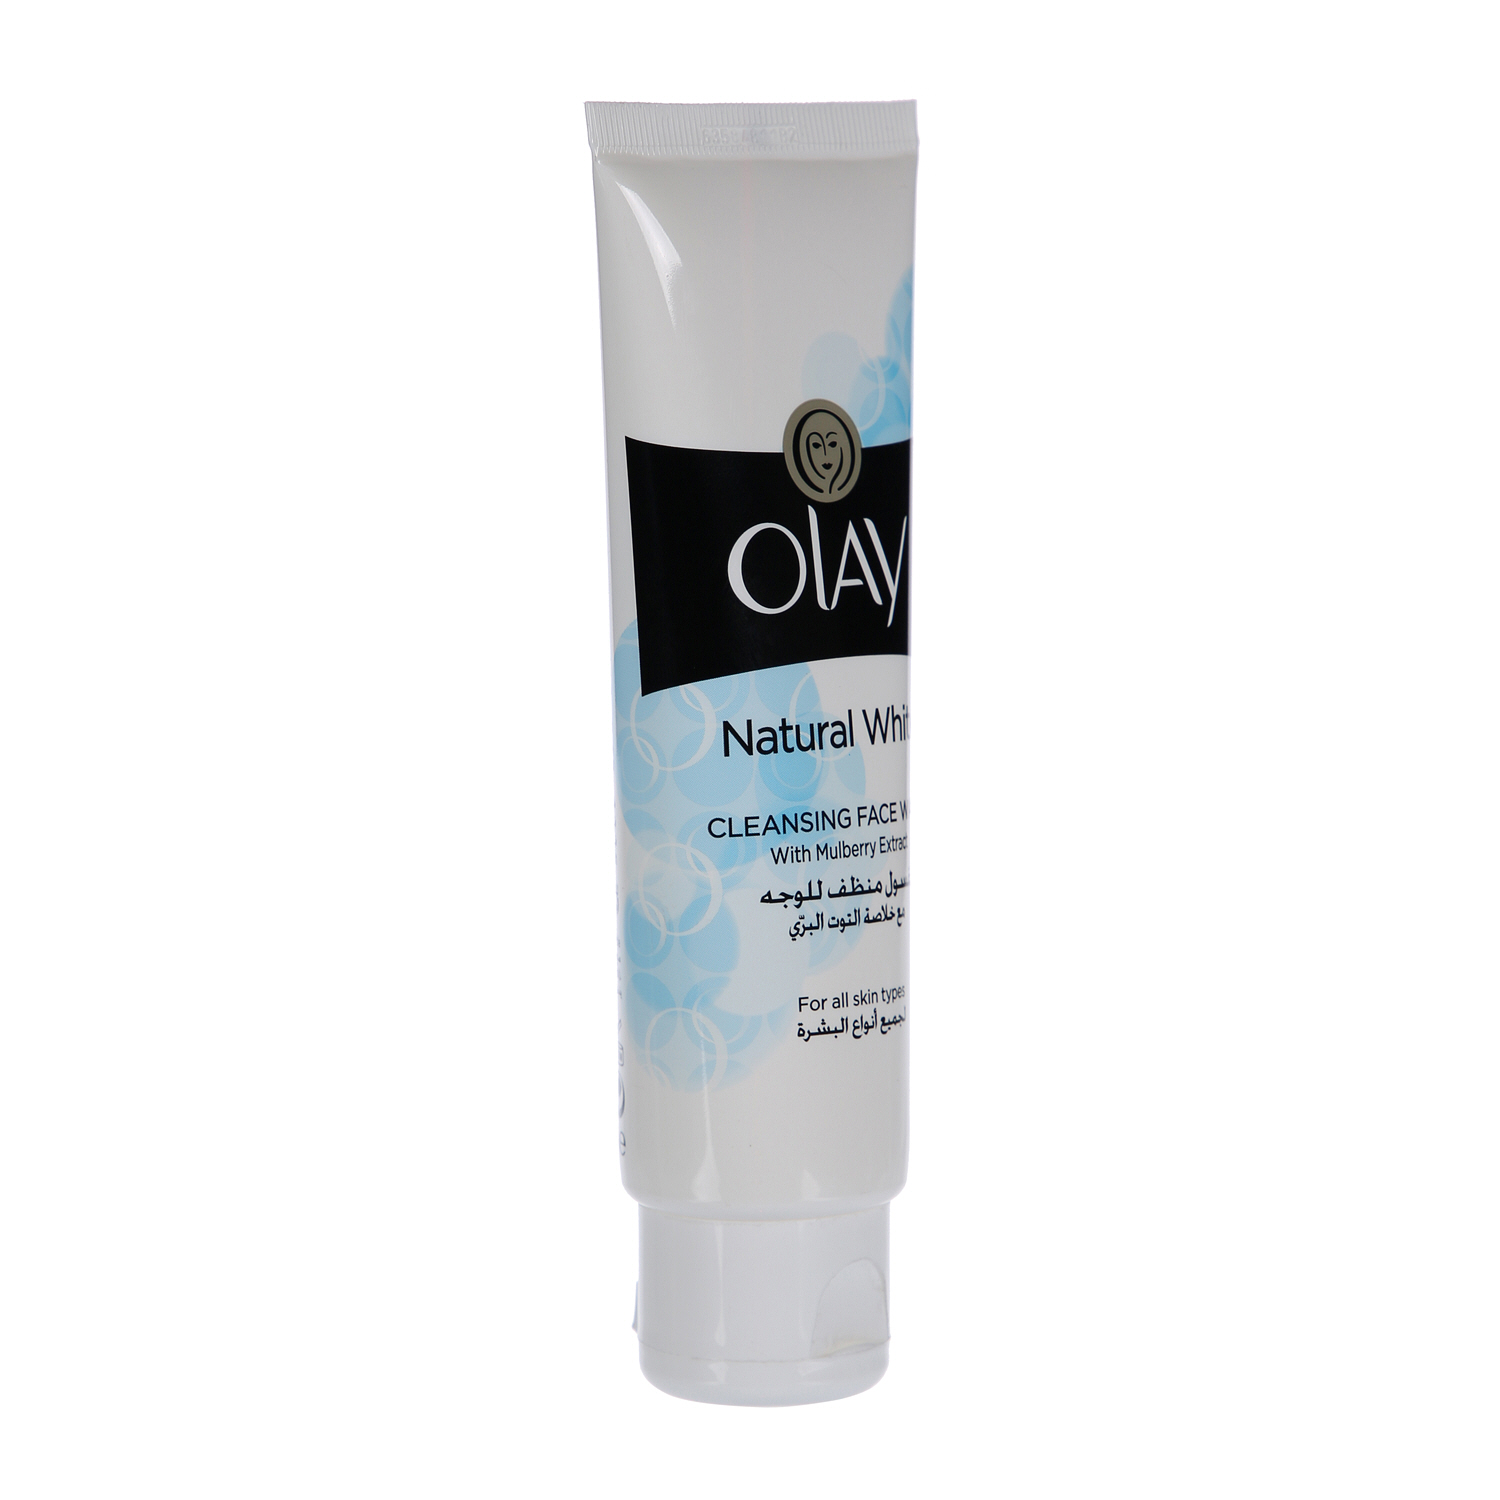 Olay Natural White Cleansing Face Wash with Mulberry Extract 100ml